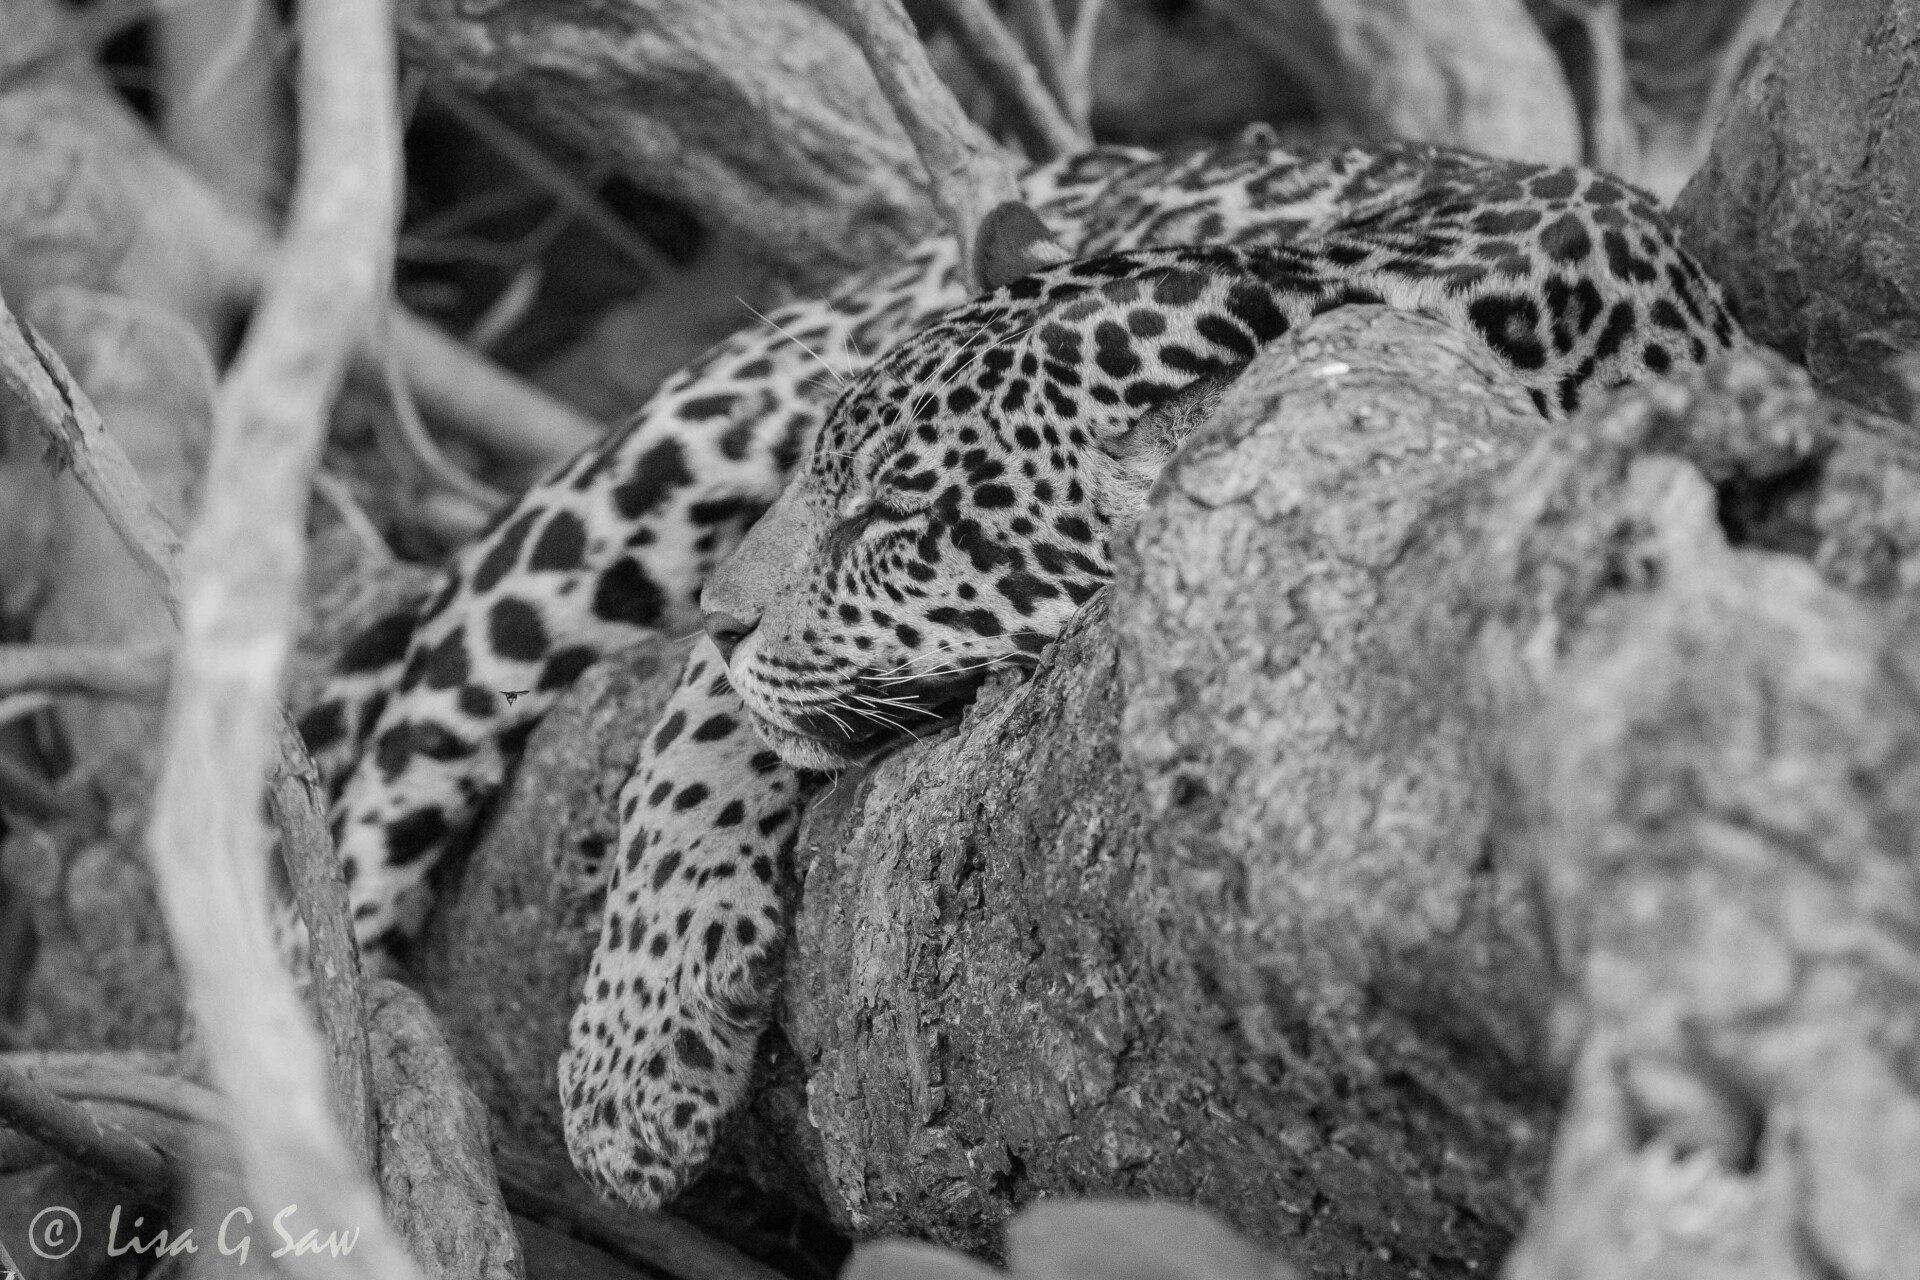 Jaguar relaxed over fallen tree trunk (black and white)